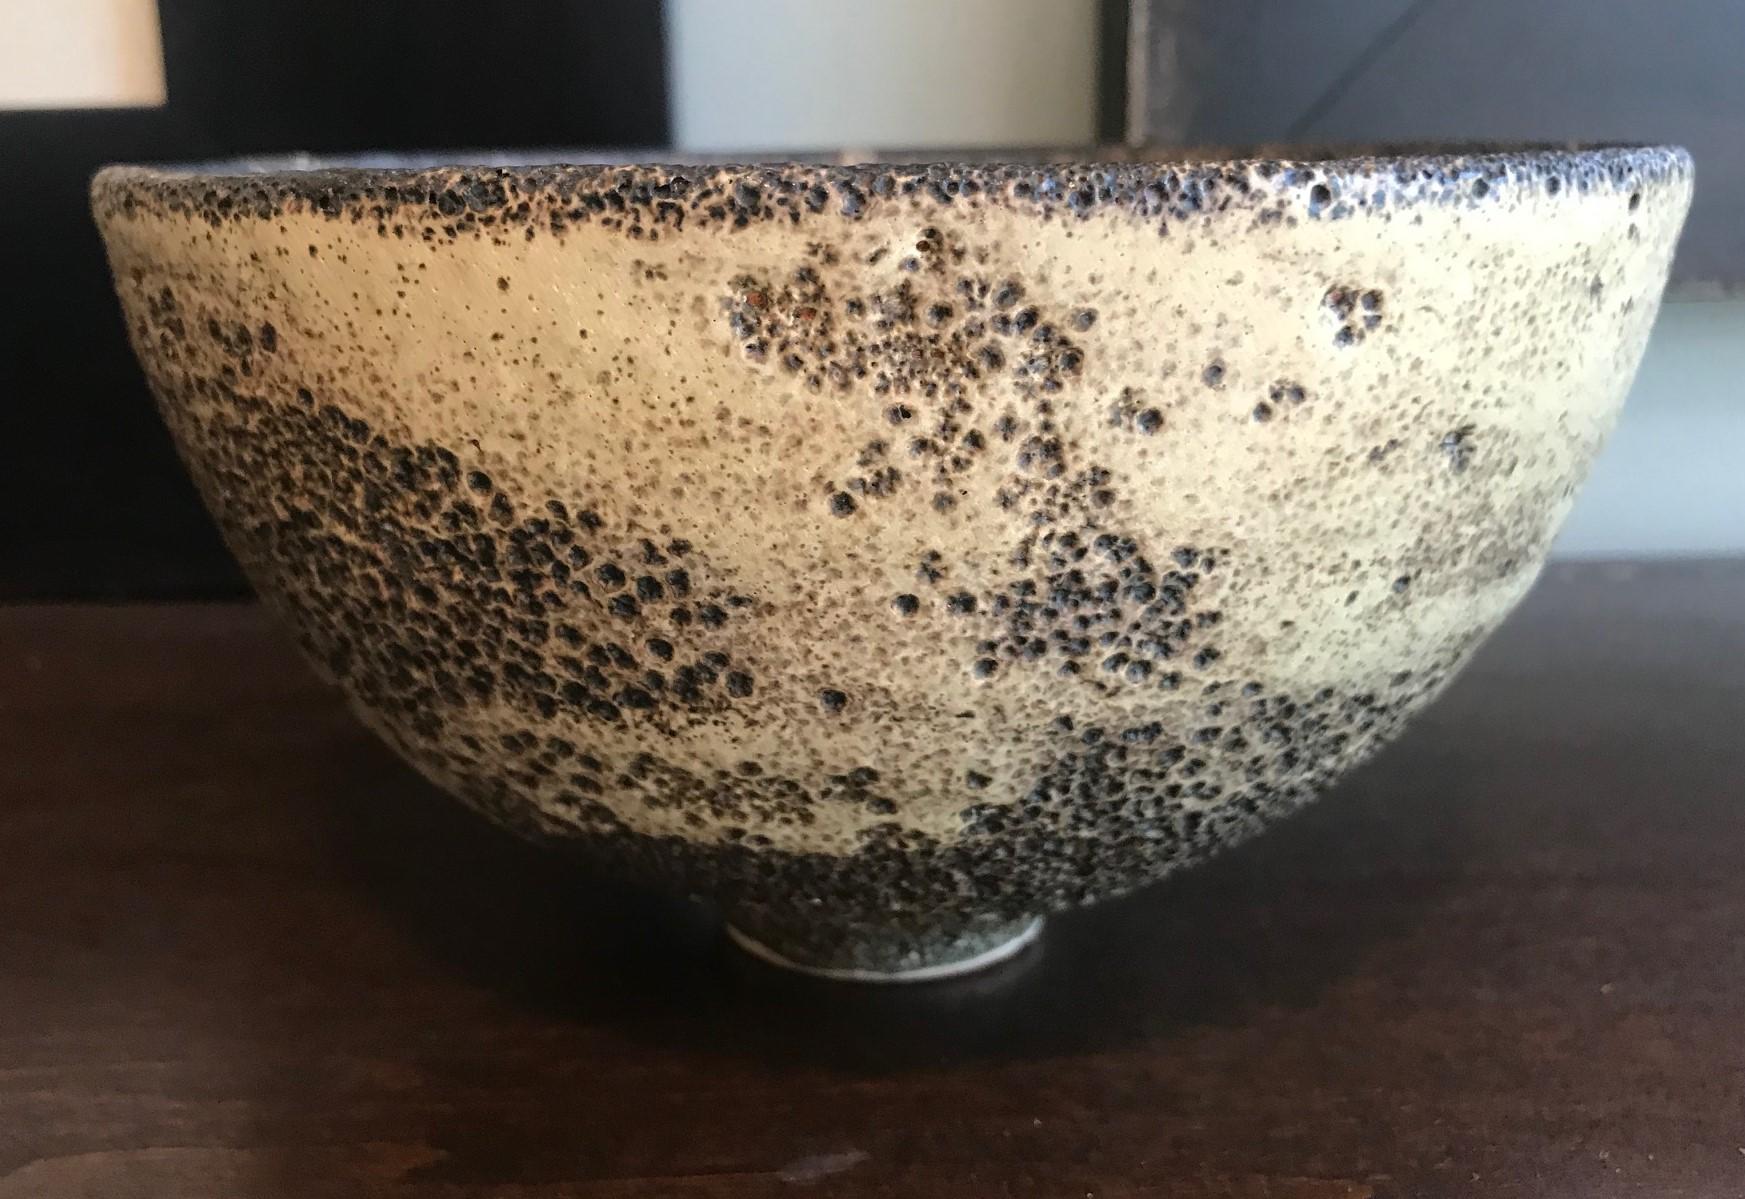 A masterful work by famed potters Otto and Gertrud Natzler. This round-shaped footed bowl was hand thrown and formed by Gertrud and glazed by Otto with one of his famed volcanic crater glazes. The bowl captures your attention from all angles.